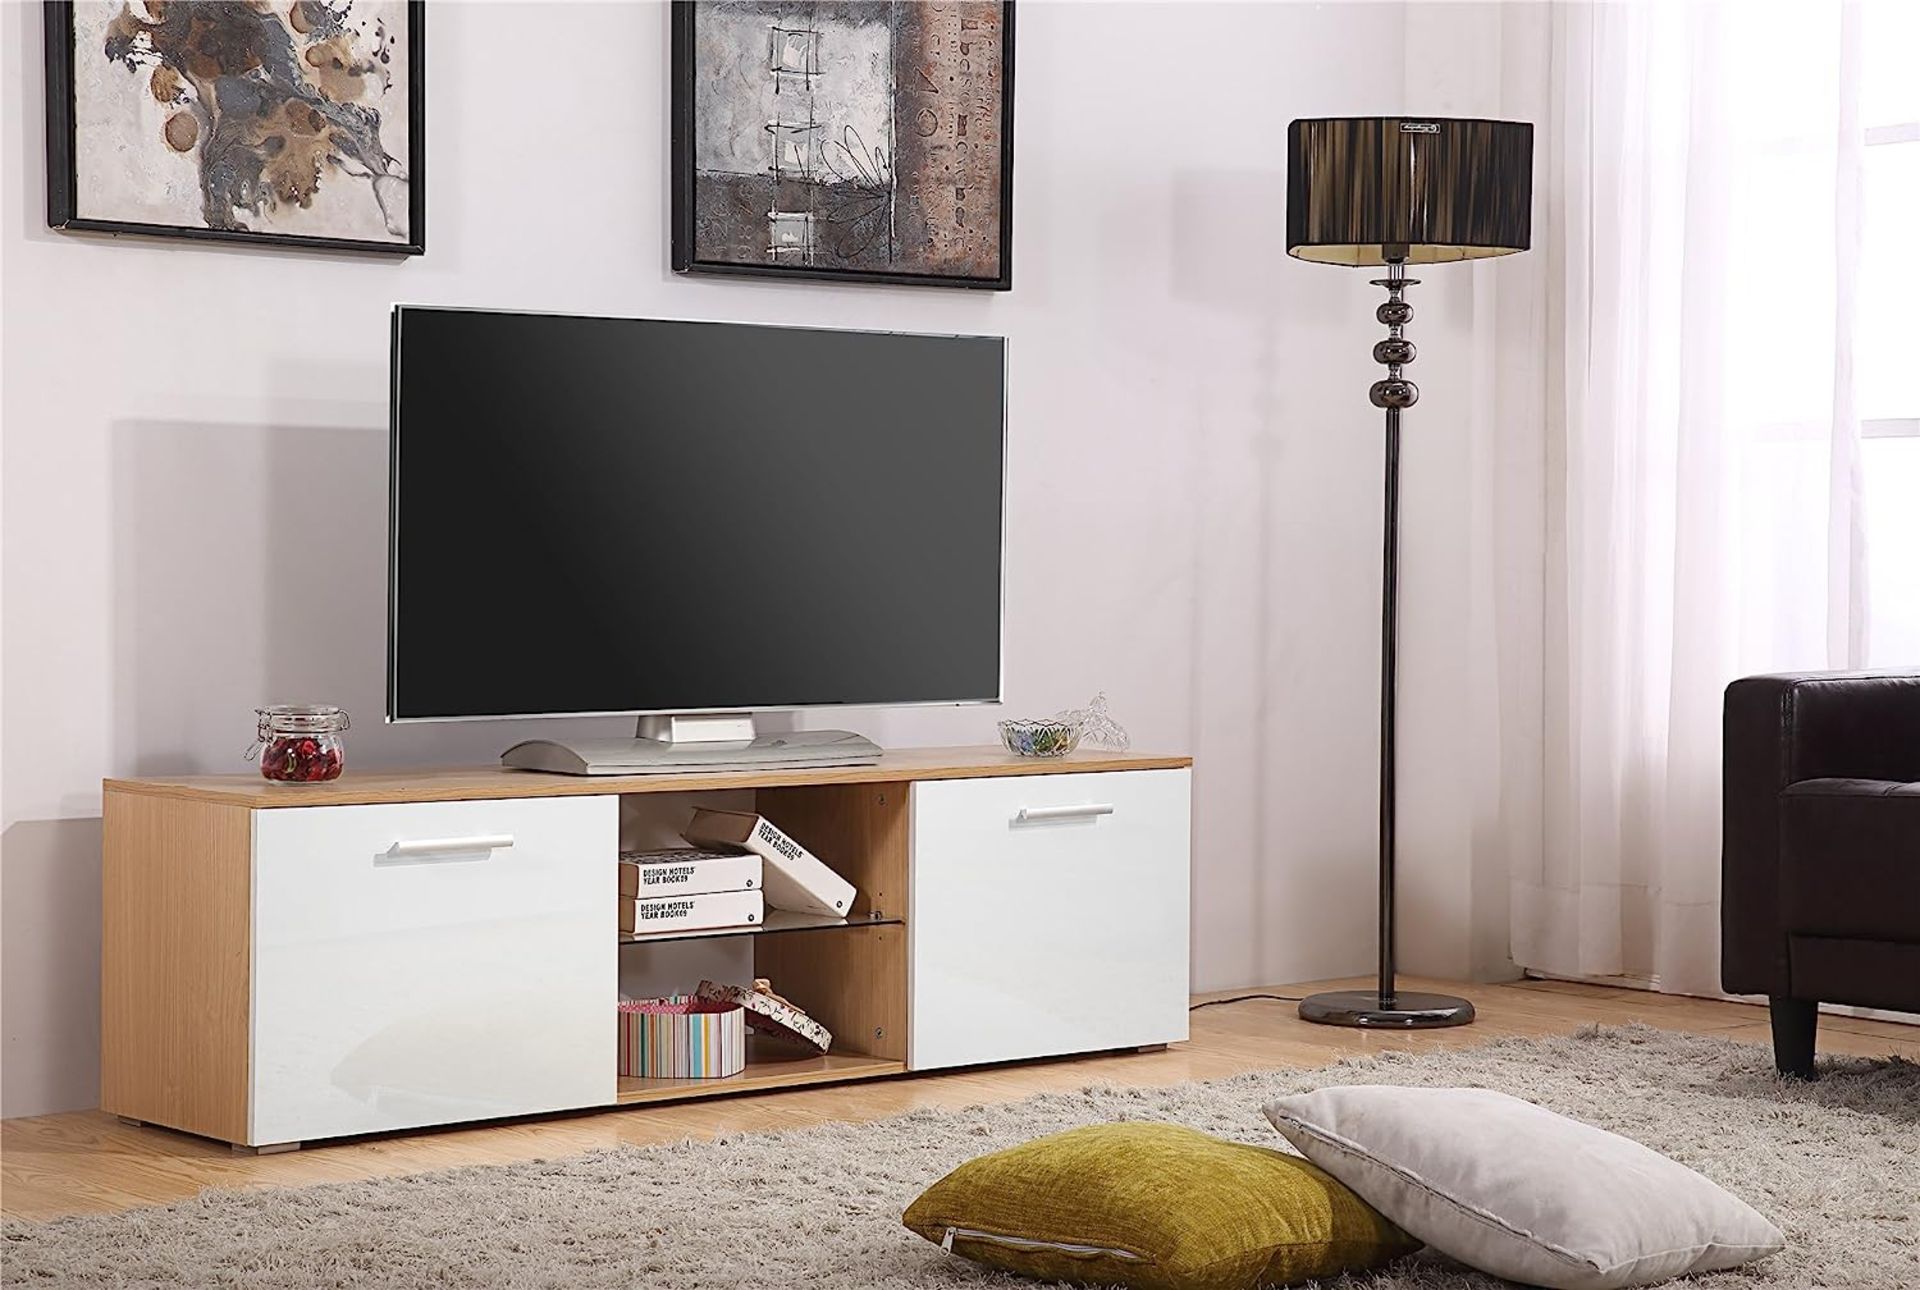 10 X BRAND NEW HARMIN MODERN 160CM TV STAND CABINET UNIT WITH HIGH GLOSS DOORS (WHITE ON OAK)